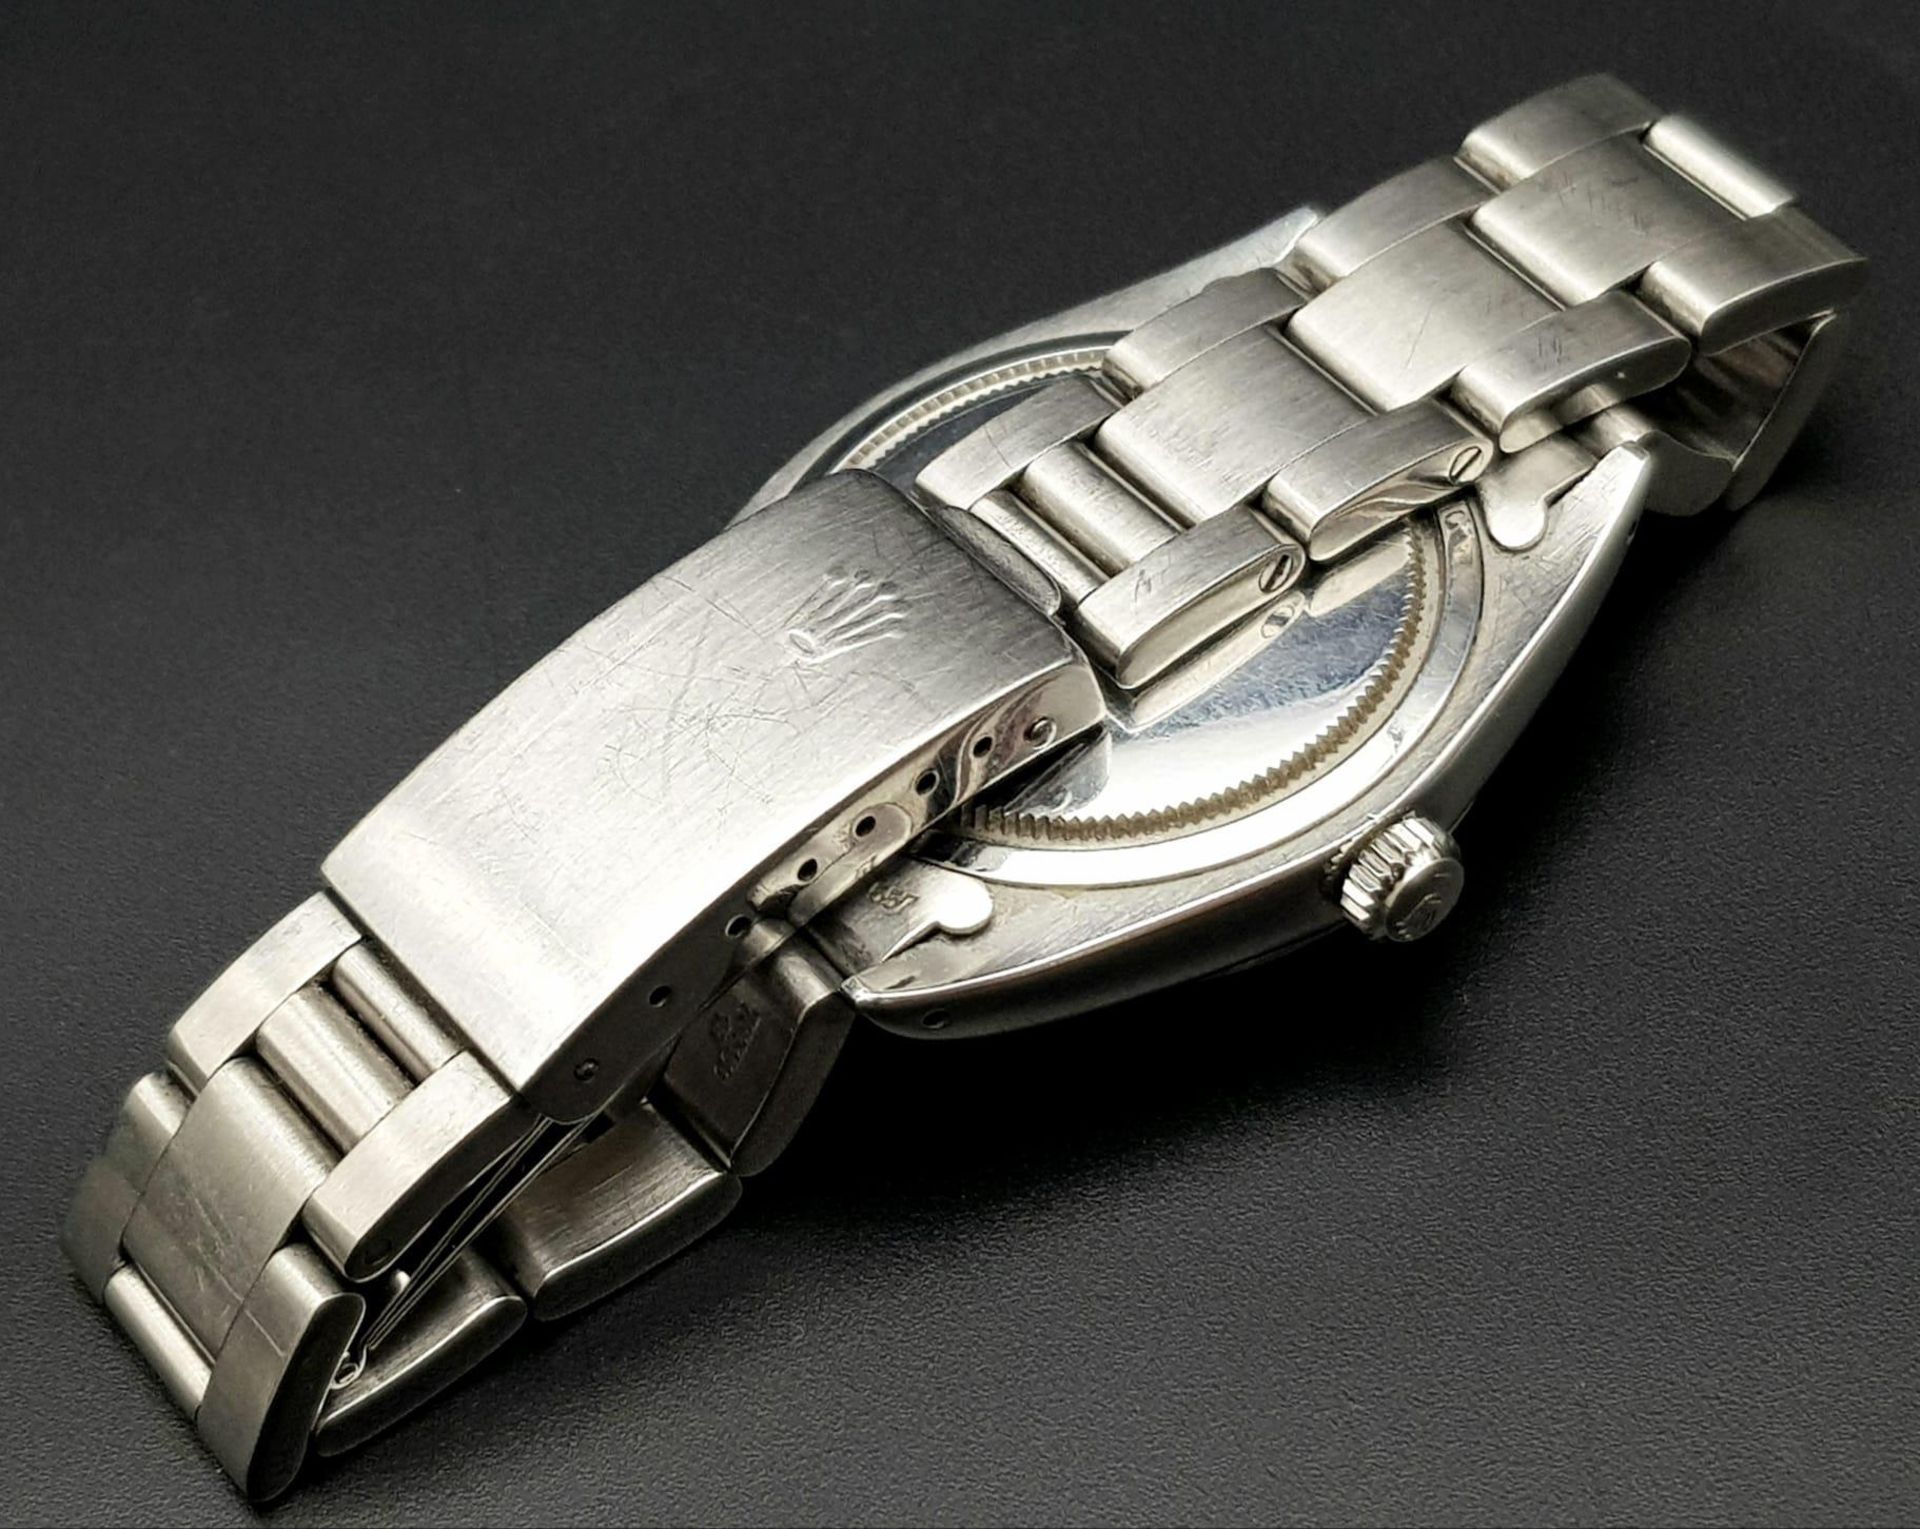 A Vintage Rolex Oysterdate Precision Mid-Size Watch. Stainless steel bracelet and case - 35mm. - Image 4 of 9